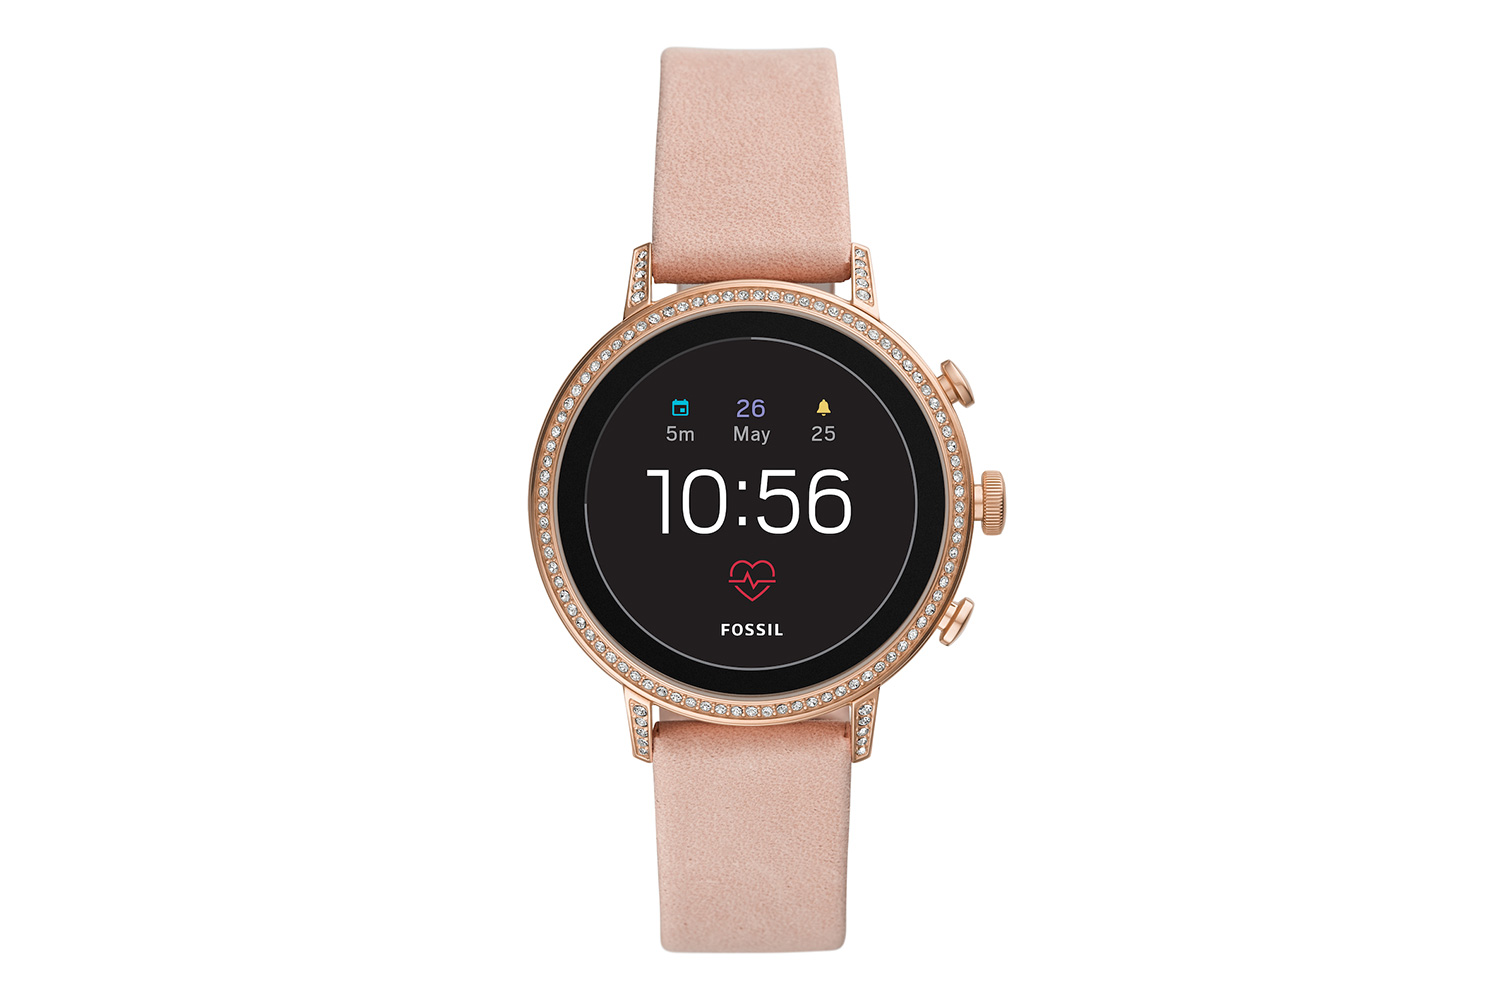 Fossil's New Smartwatches Make Your Heart Beat Faster - and Show You | Digital